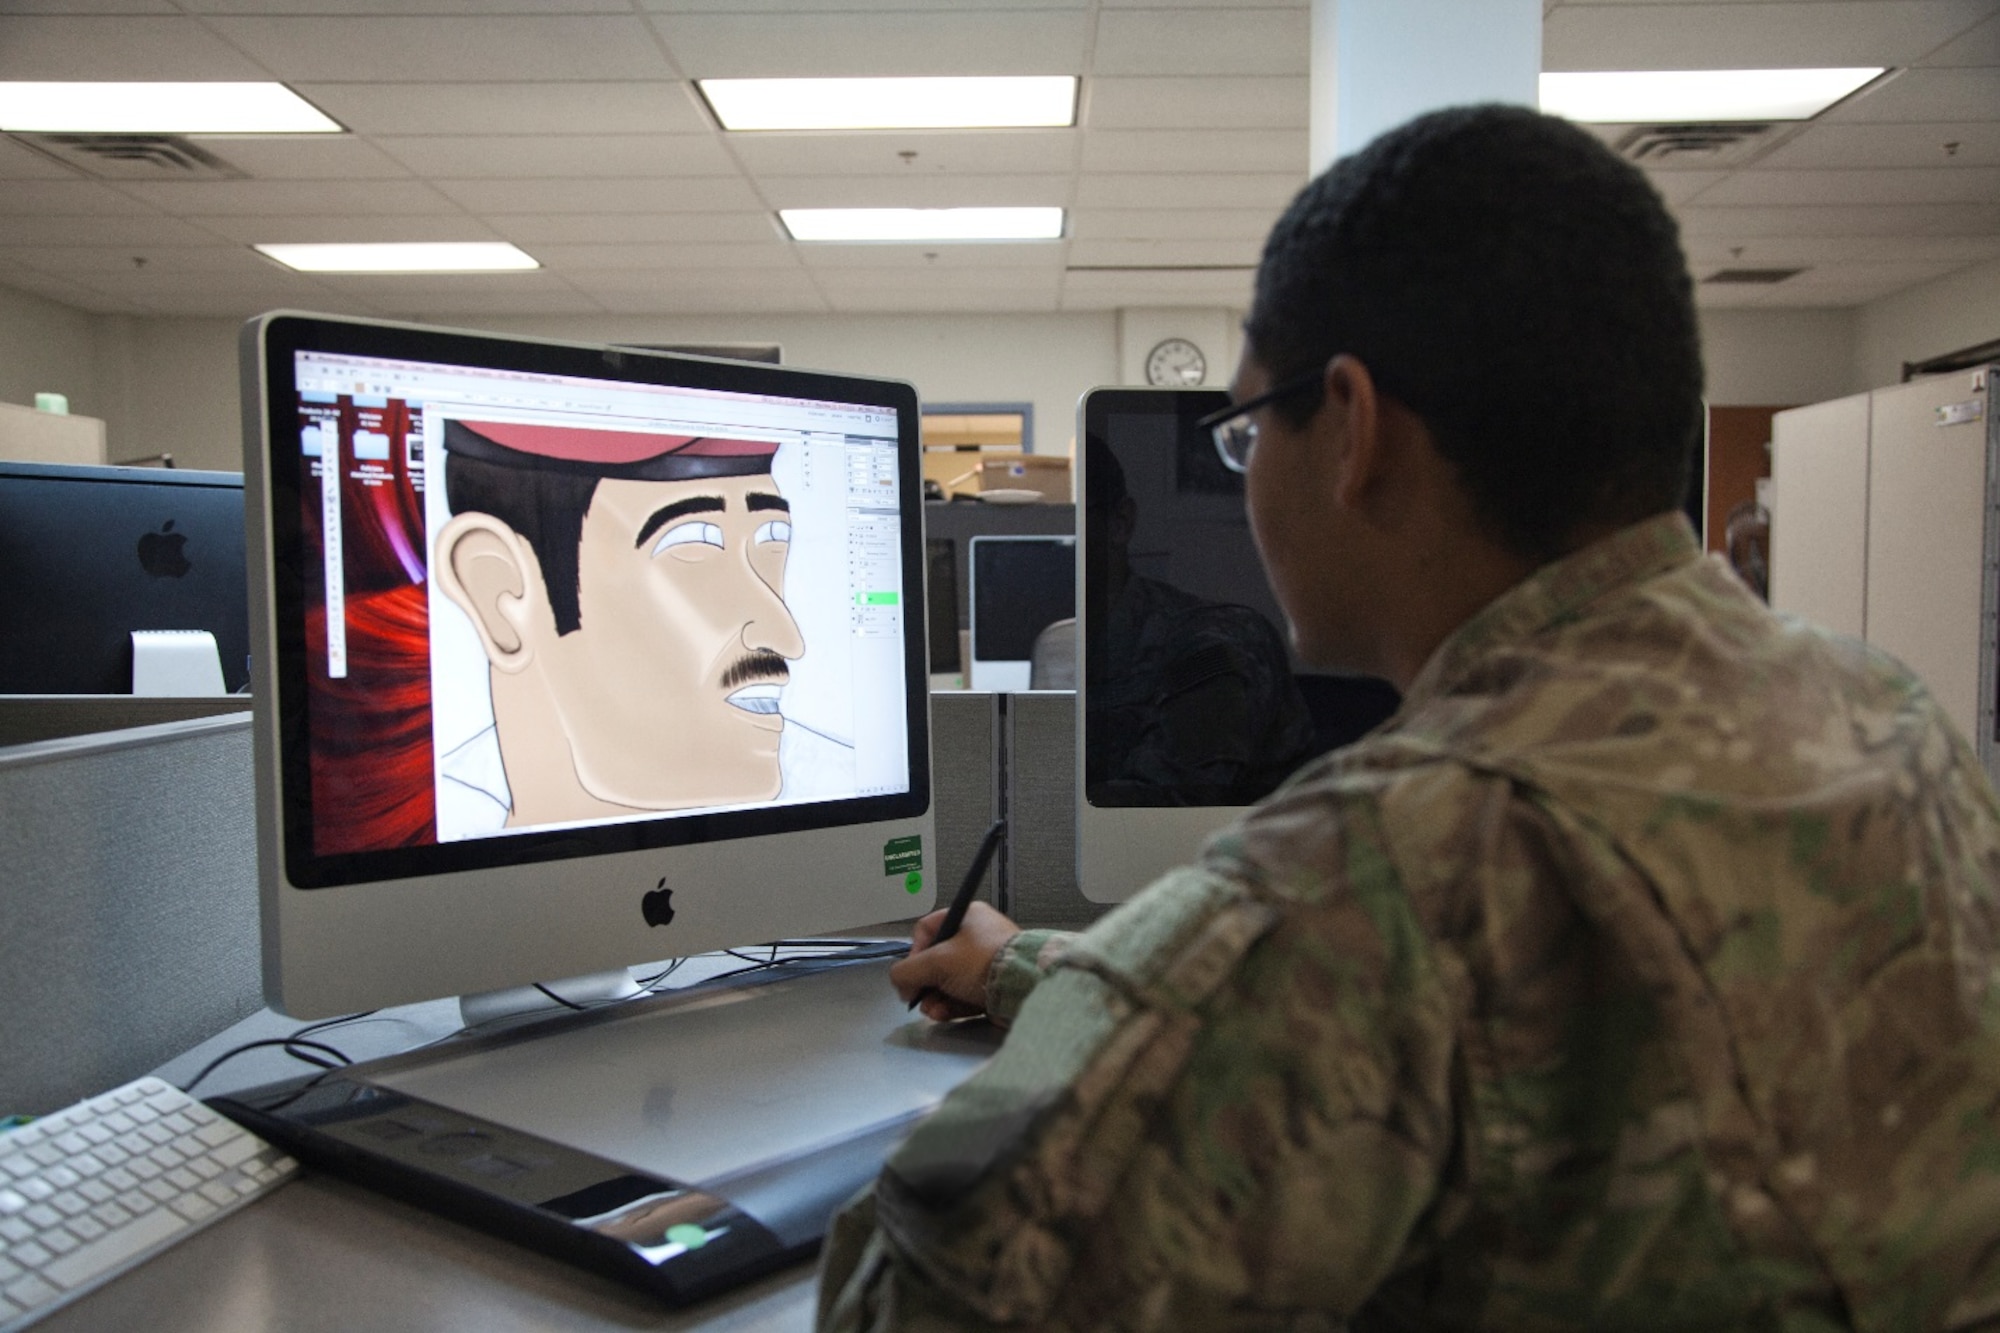 U.S. Army Spc. James edits an illustration on Nov. 3, 2016, at the Military Information Support Task Force-Central (MISTF-C) on Al Udeid Air Base, Qatar. James is a 25M Multi-Media Graphic Illustrator assigned to the MISTF-C as a member of the Product Development Detachment. (U.S. Army photo by Staff Sgt. Brian)